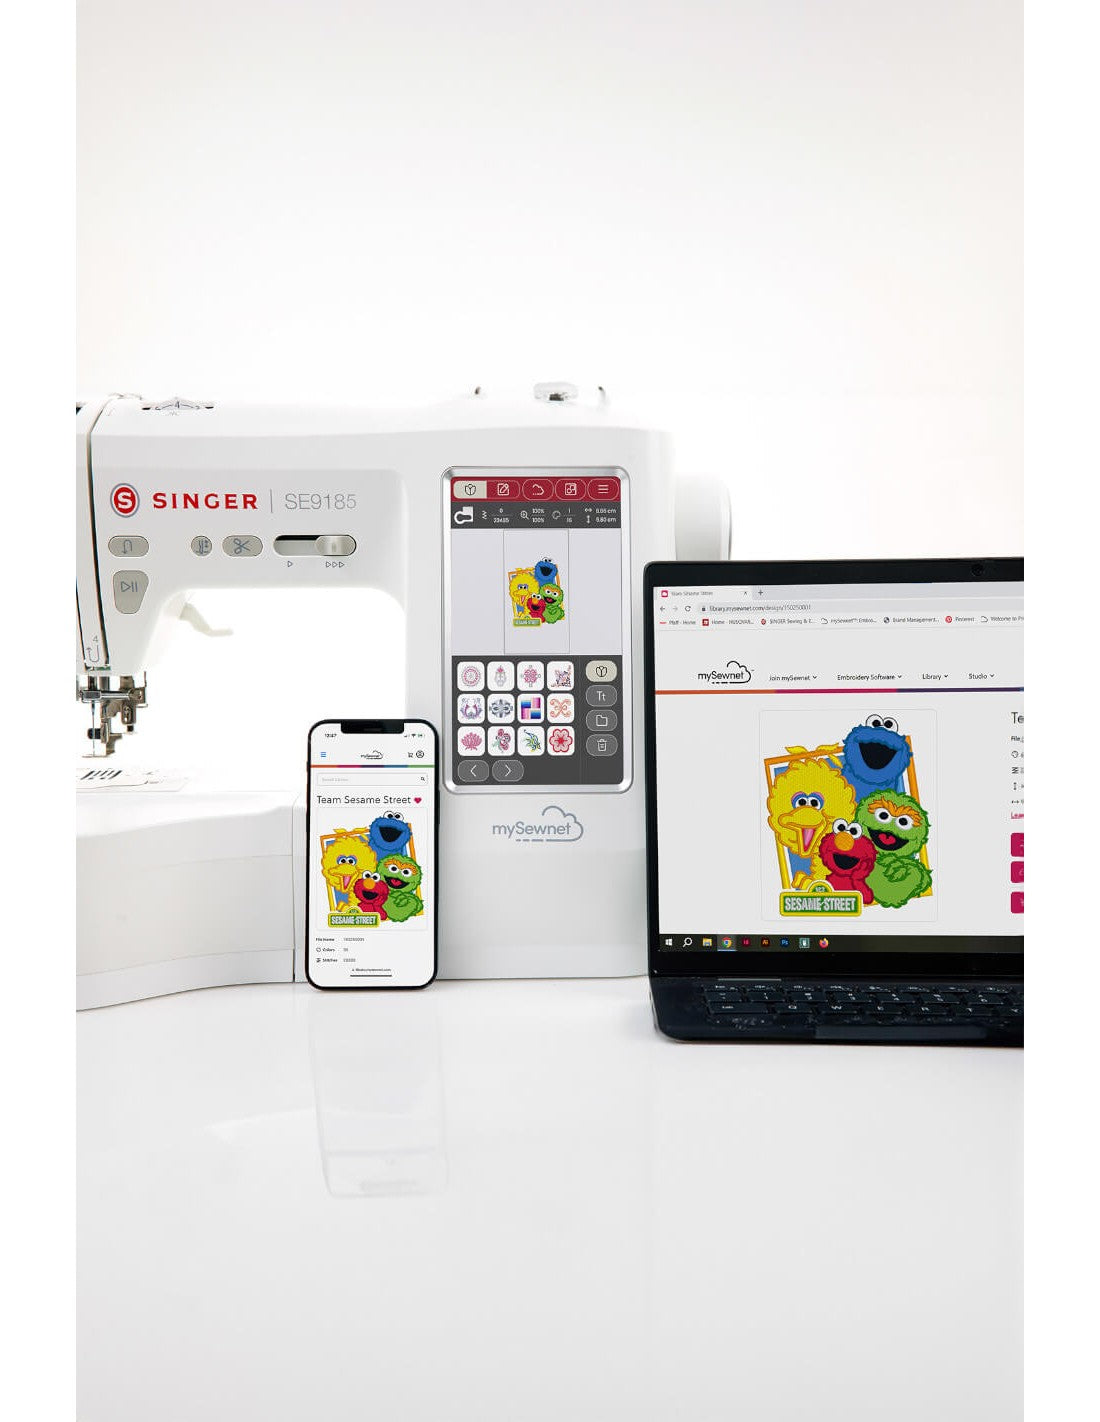 Singer SE9185 Sewing, Quilting and Embroidery machine with WIFI, colour touchscreen. Includes a 90 day trial of MySewNet embroidery software + FREE Singer Iron worth £49.99